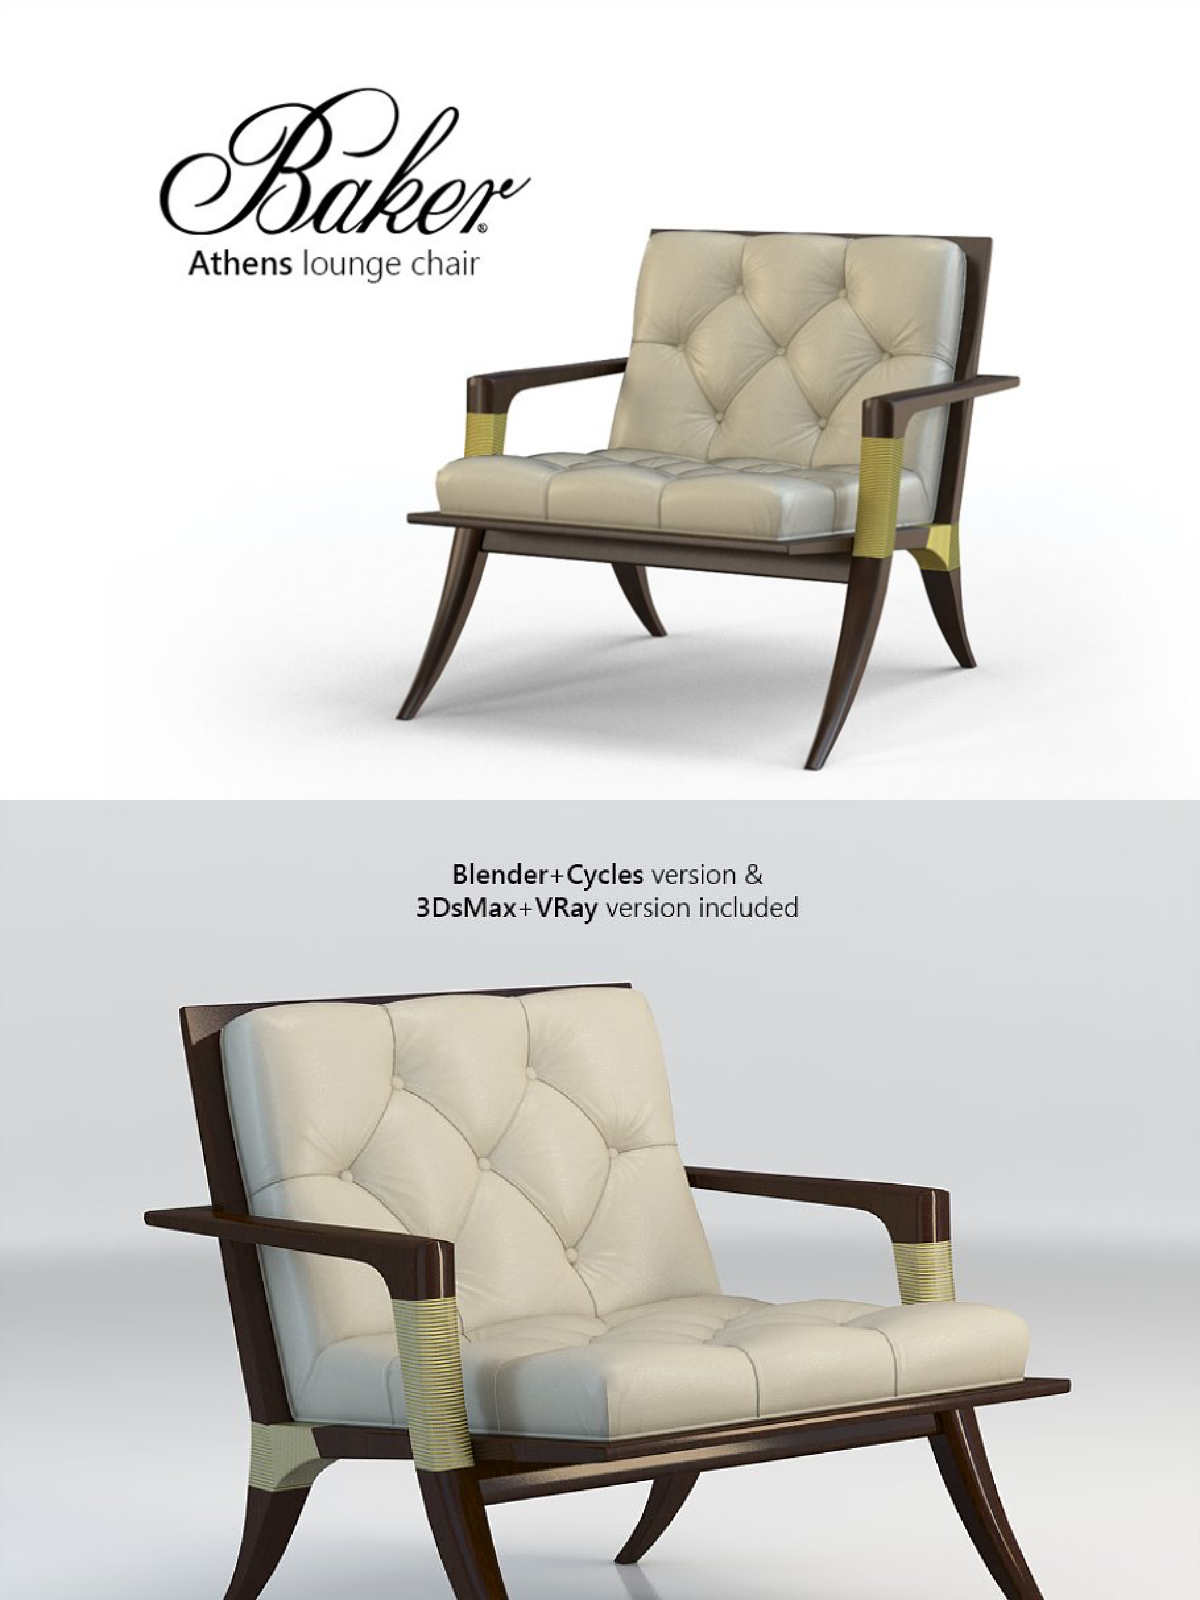 Baker athens lounge chair pinterest image preview.